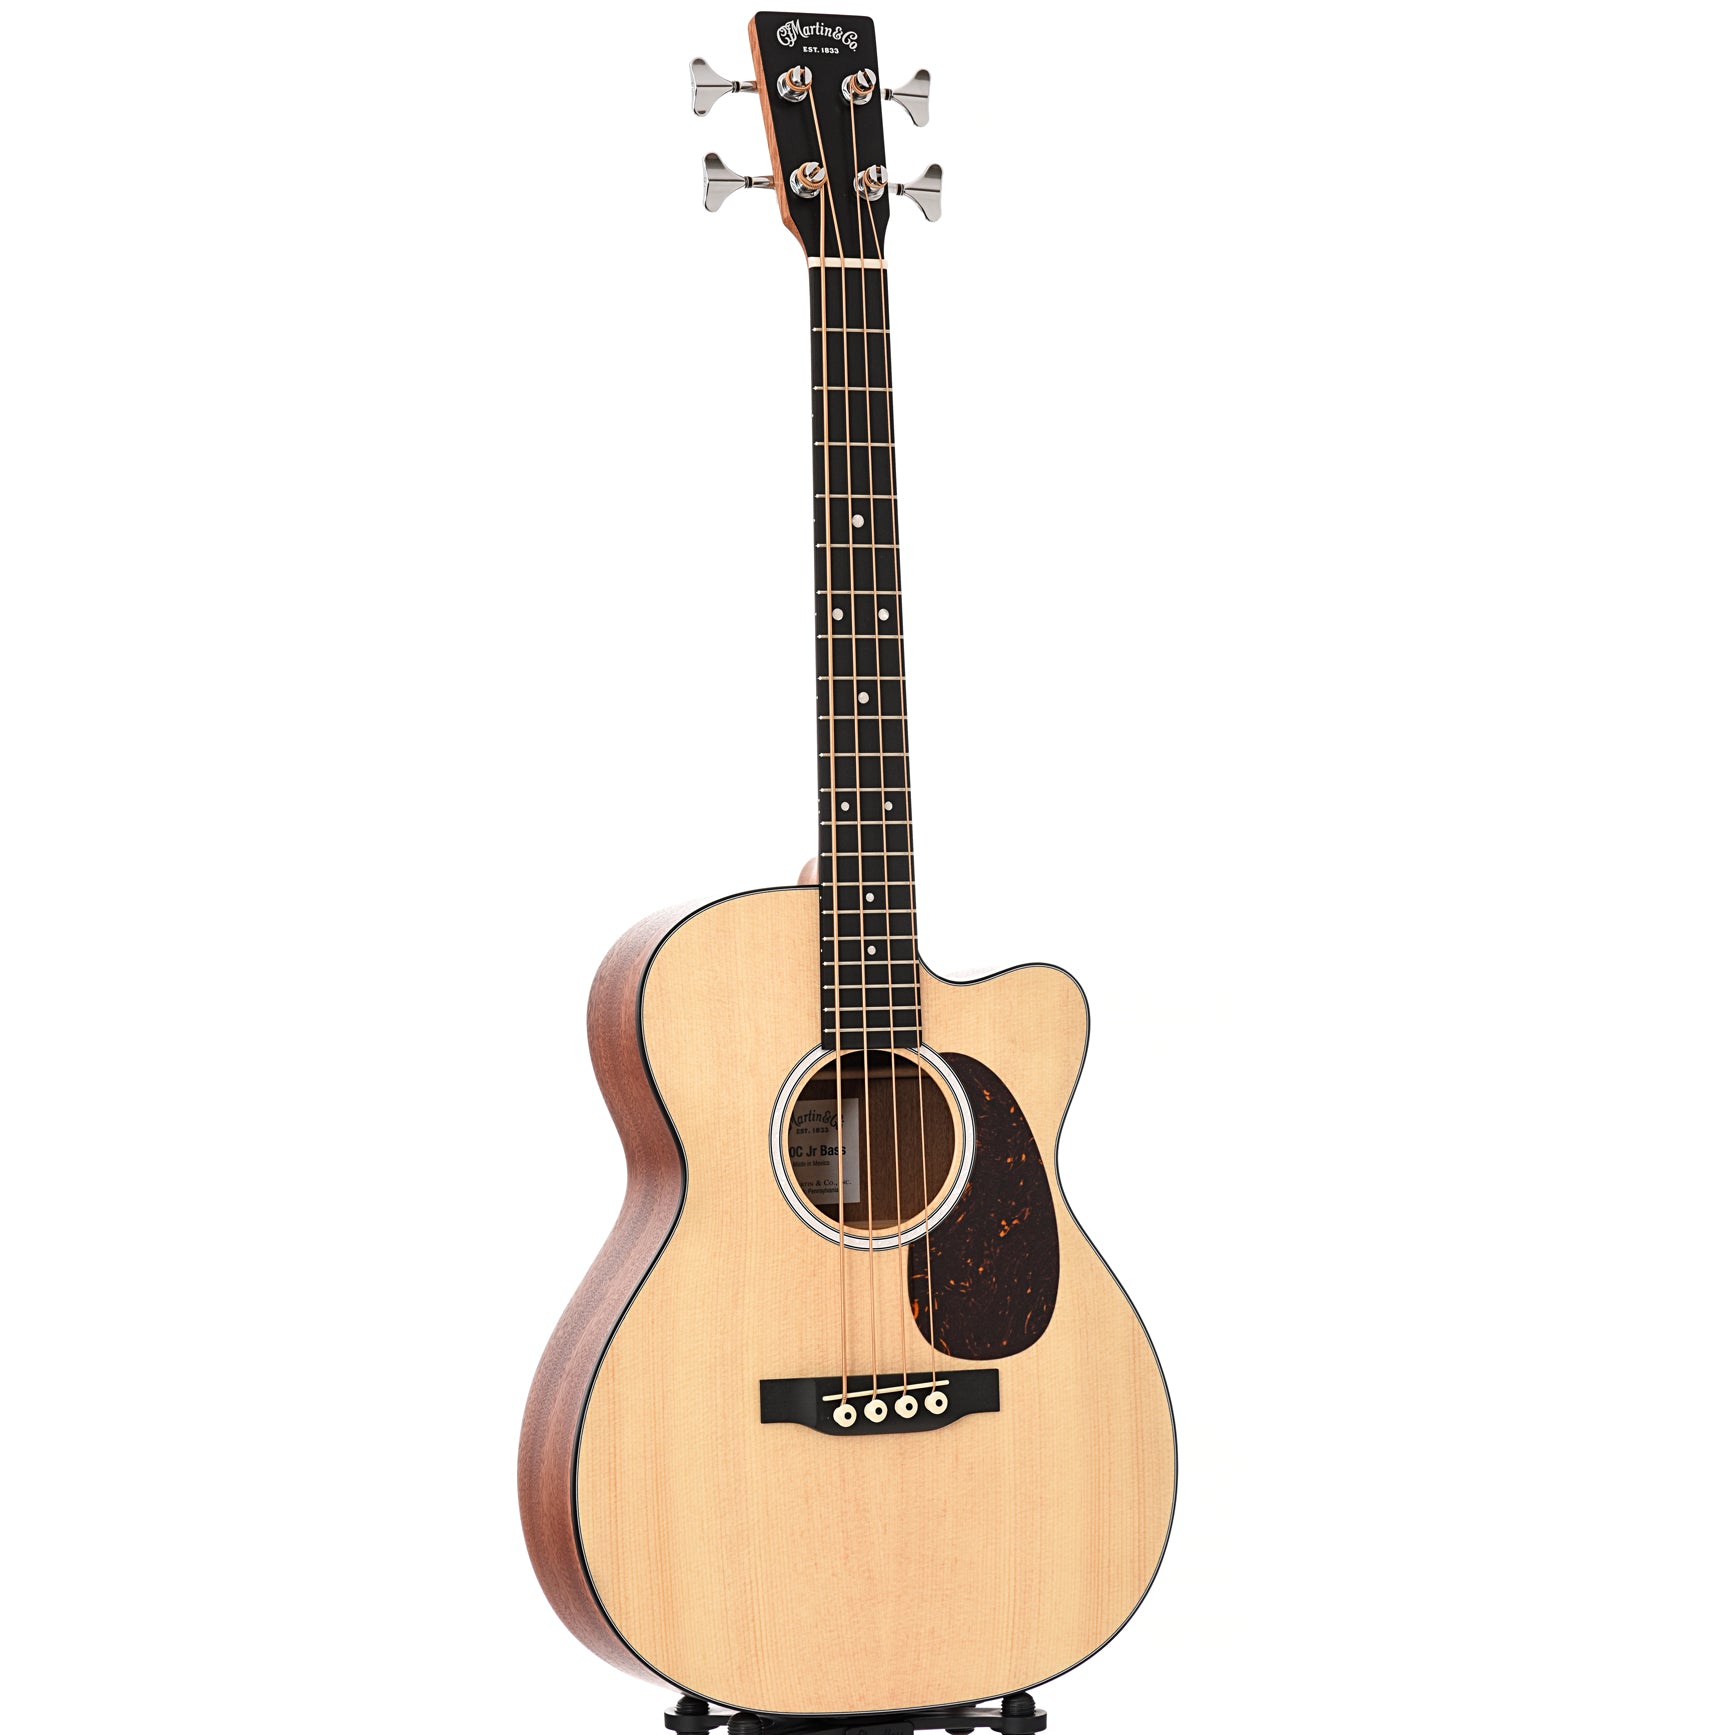 Full front and side of Martin 000CJR-10E Acoustic Bass